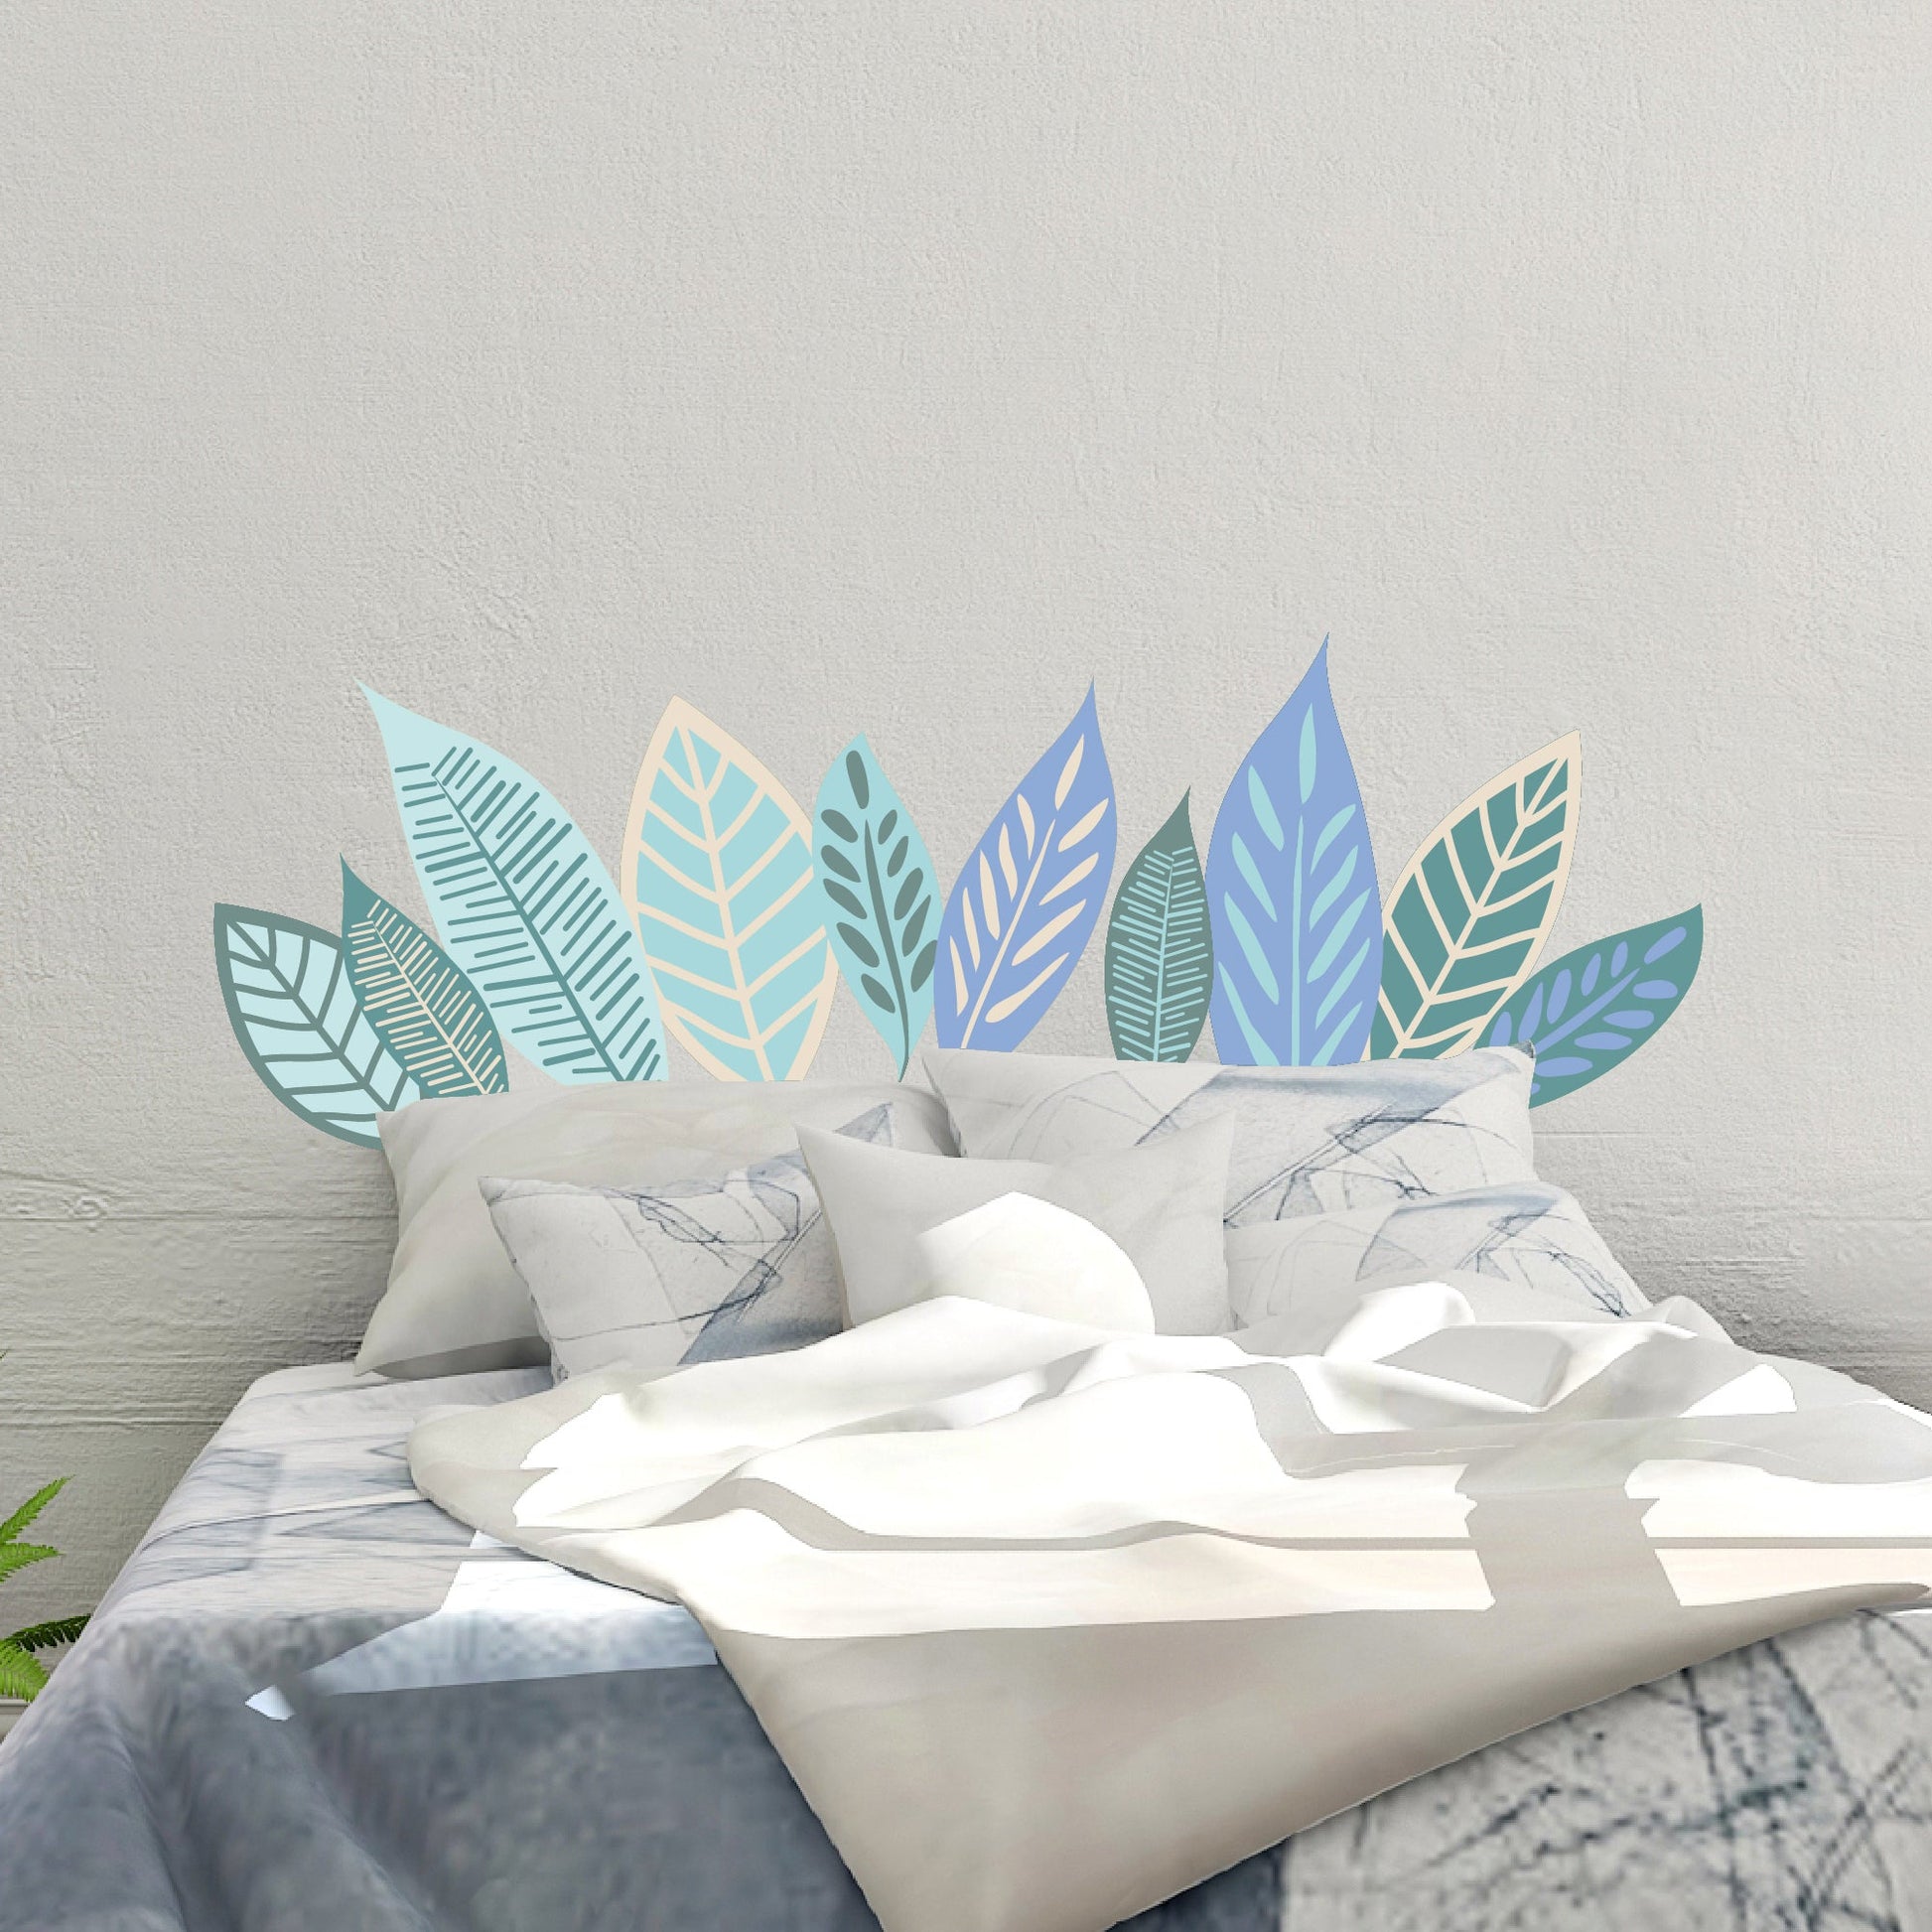 Large Leaves Wall Decals | Green Gray + Periwinkle - Picture Perfect Decals